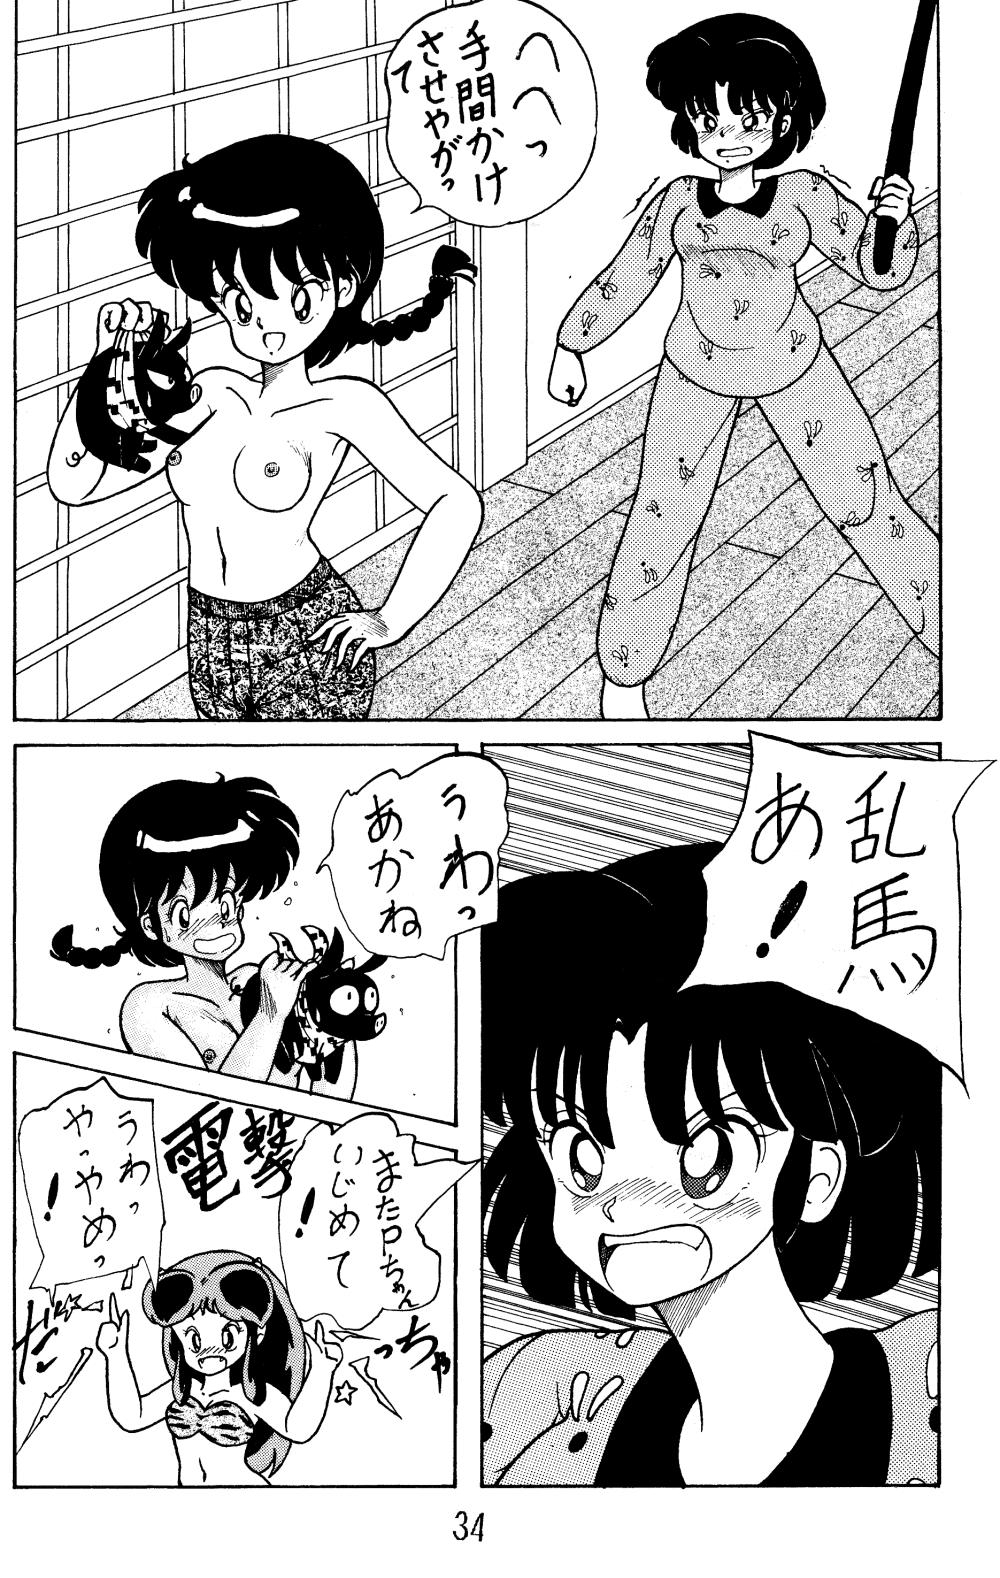 NOTORIOUS Ranma 1/2 Special 32